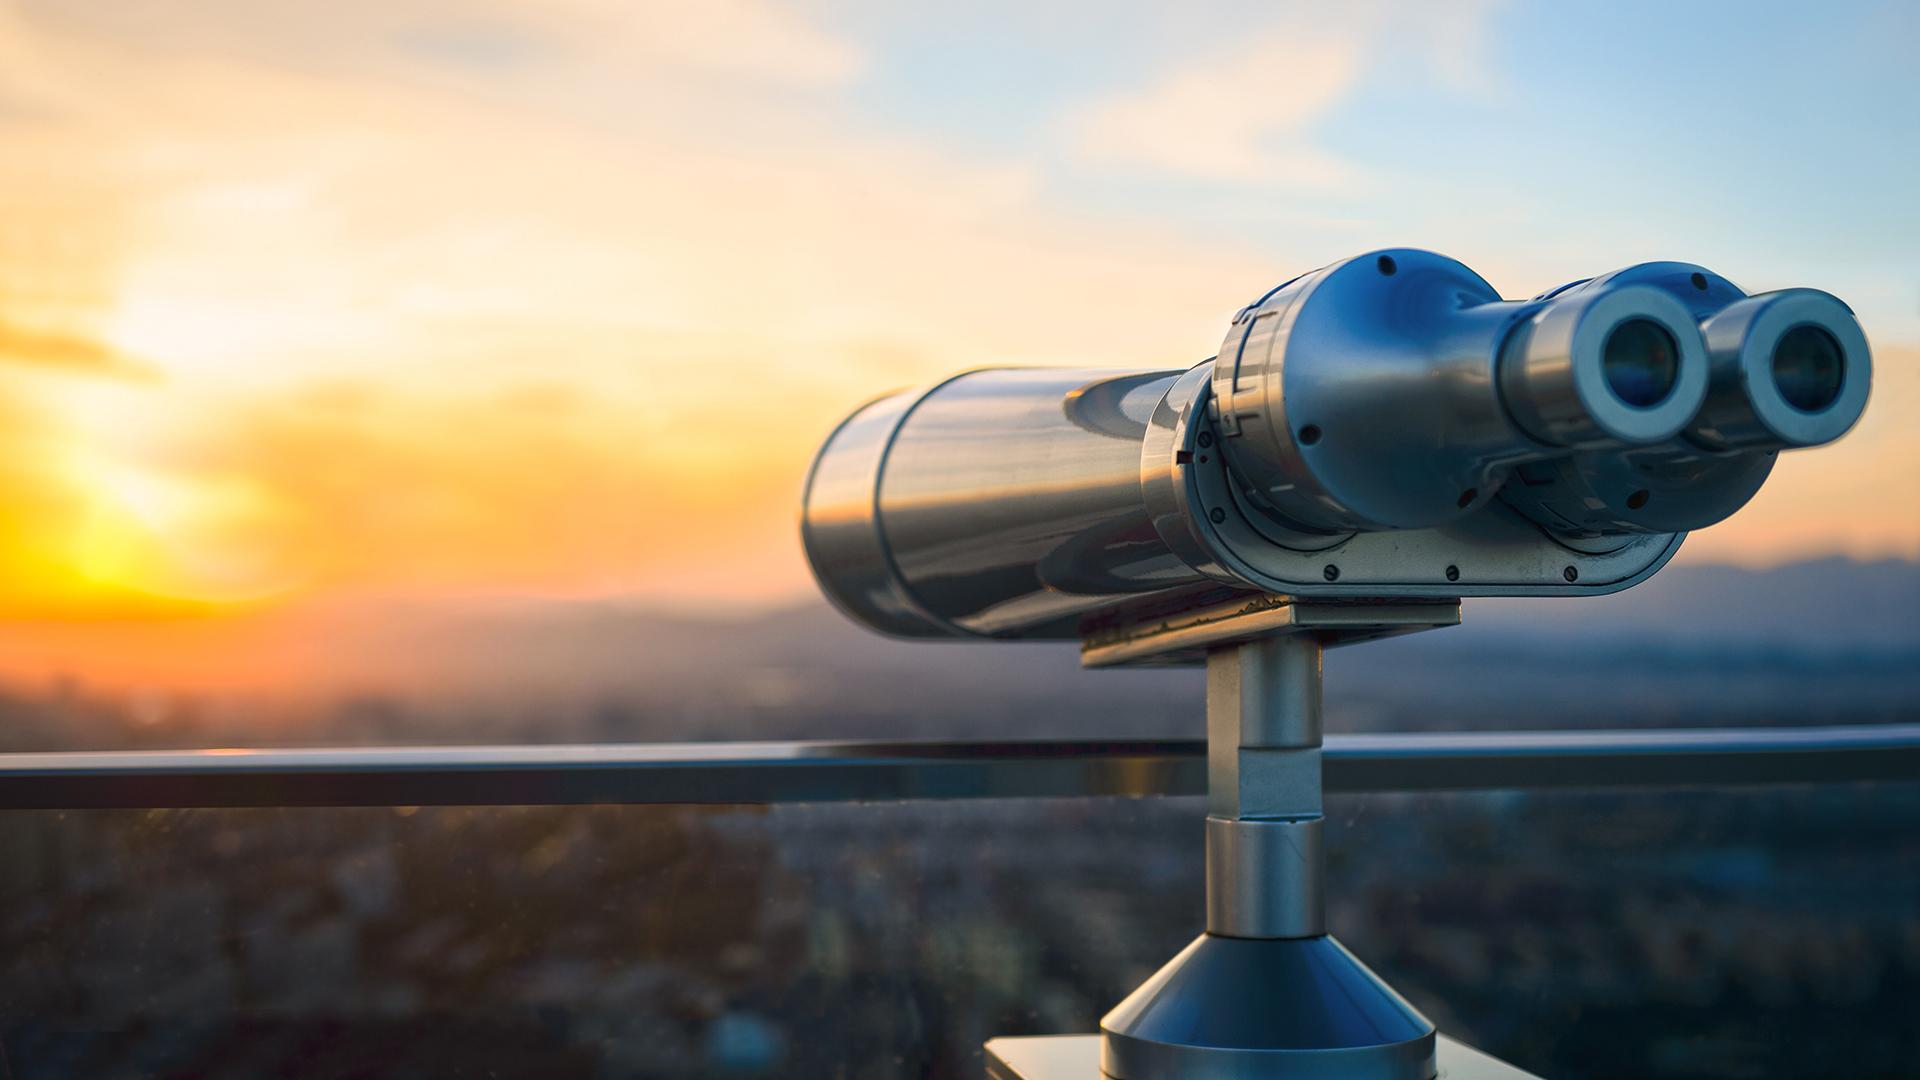 Coin-operated binoculars overlooking a sunset landscape.